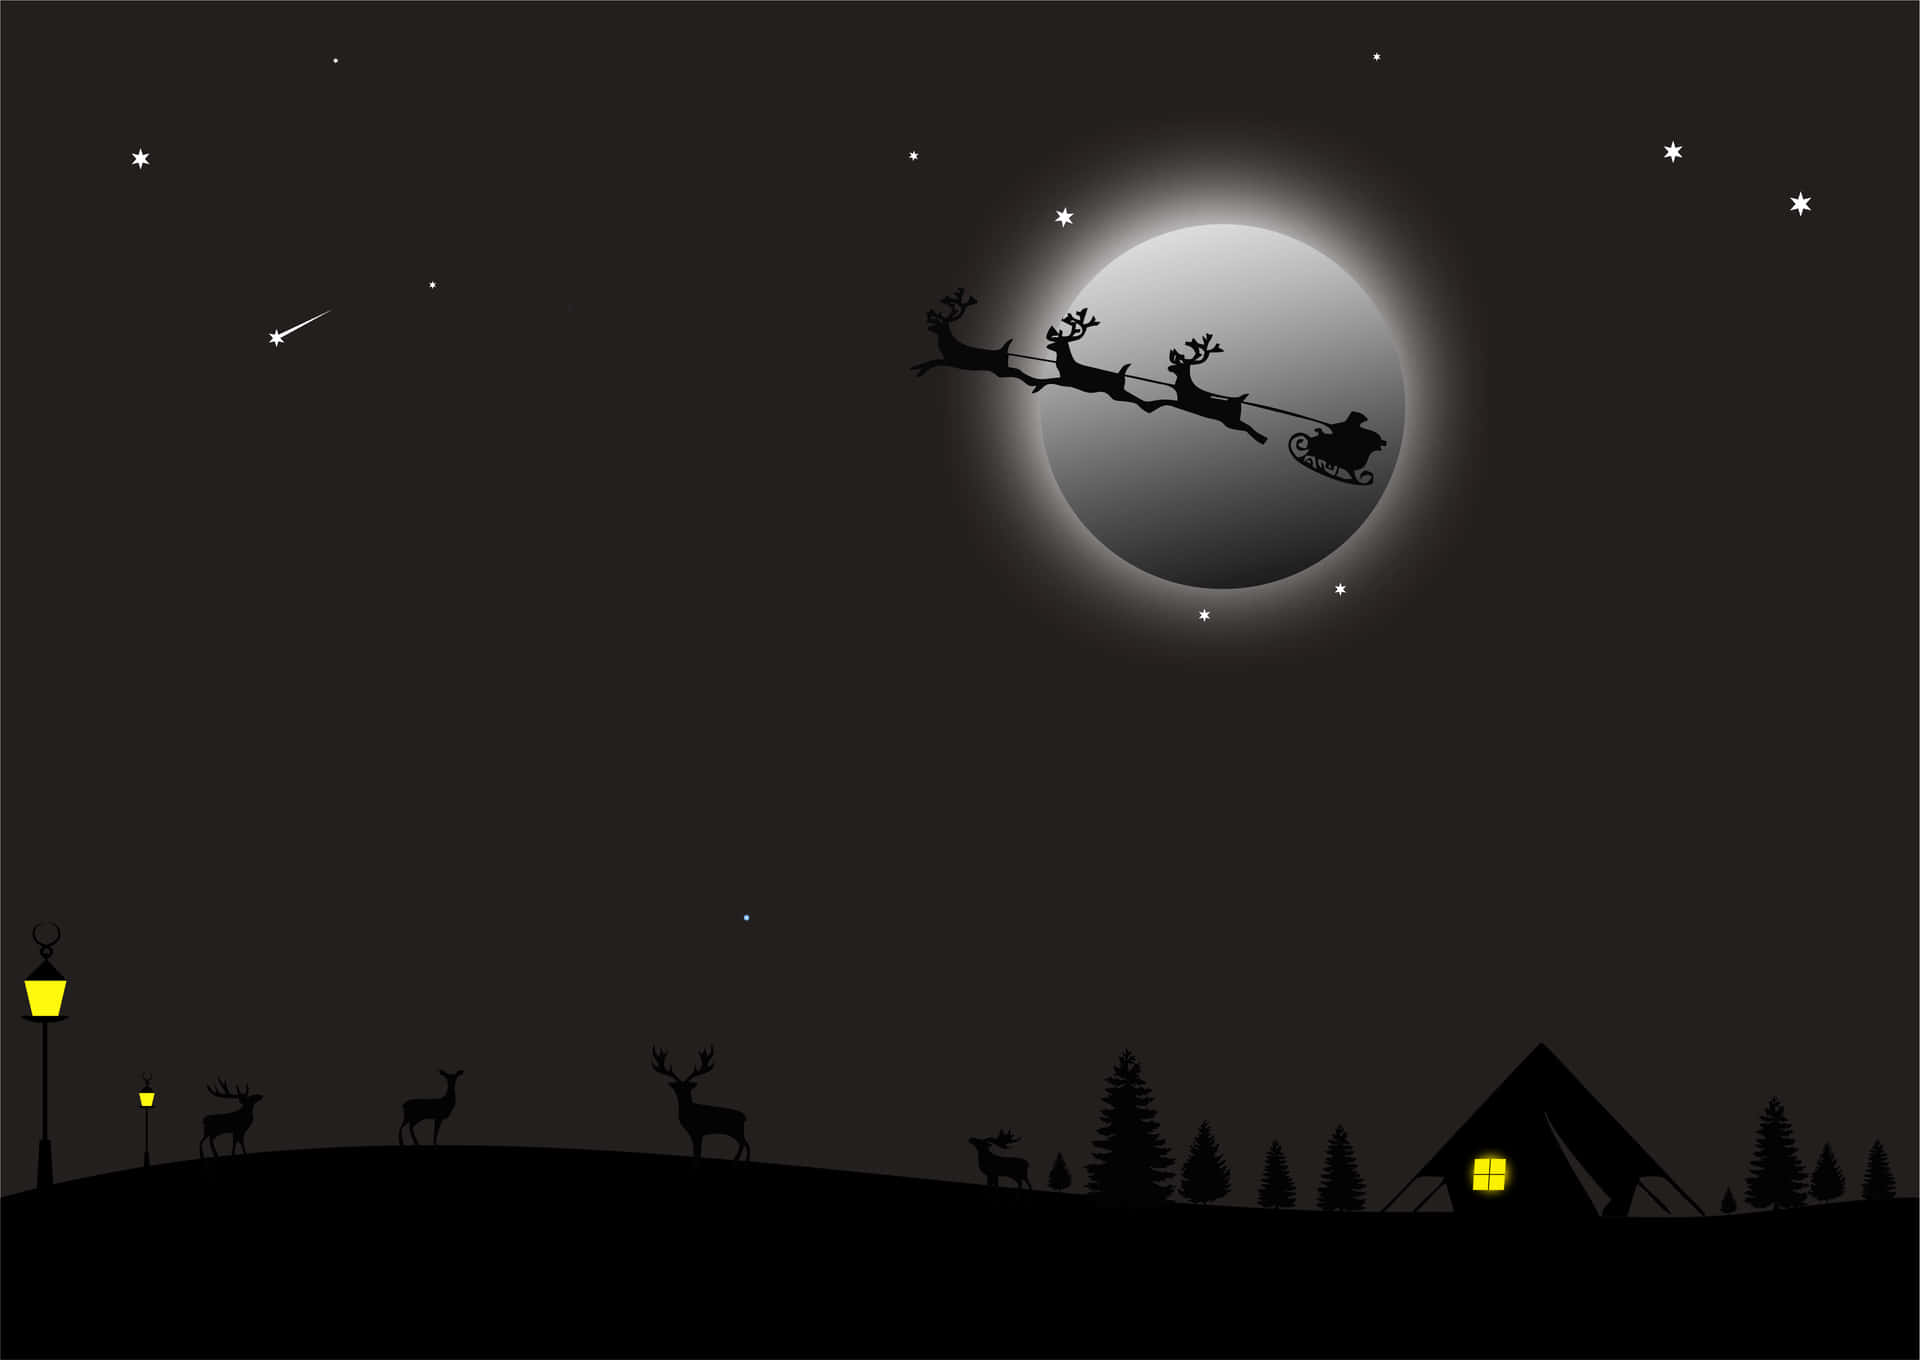 Santa Claus Flying Over A Night Sky With Deer And Sleigh Wallpaper